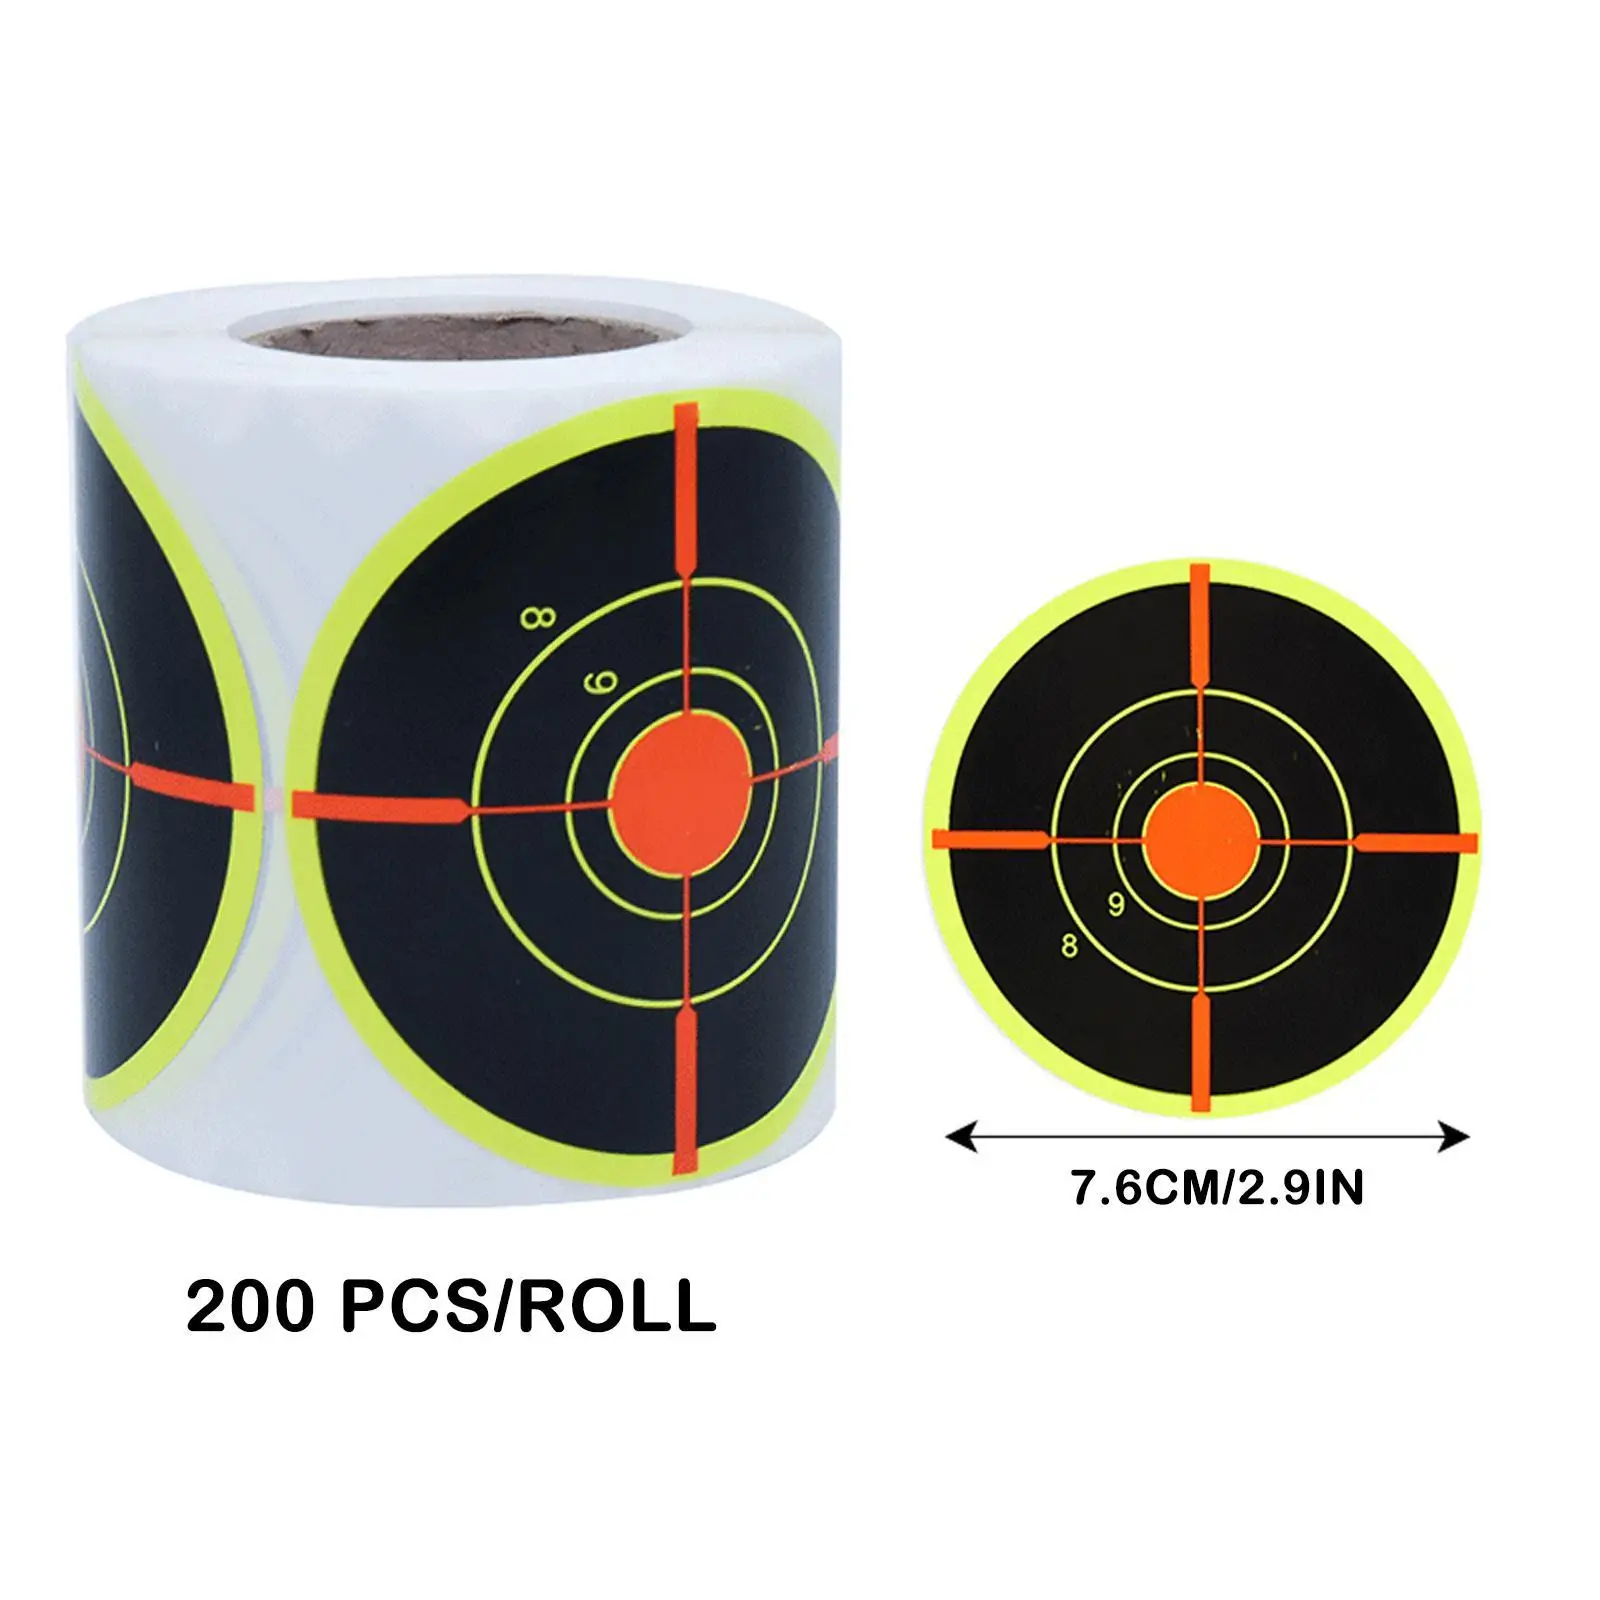 

New 200pcs Shooting Splatter Target Self-adhesive Shoot Flower Objective Targets Stickers for Archery Bow Hunting Shooting Train